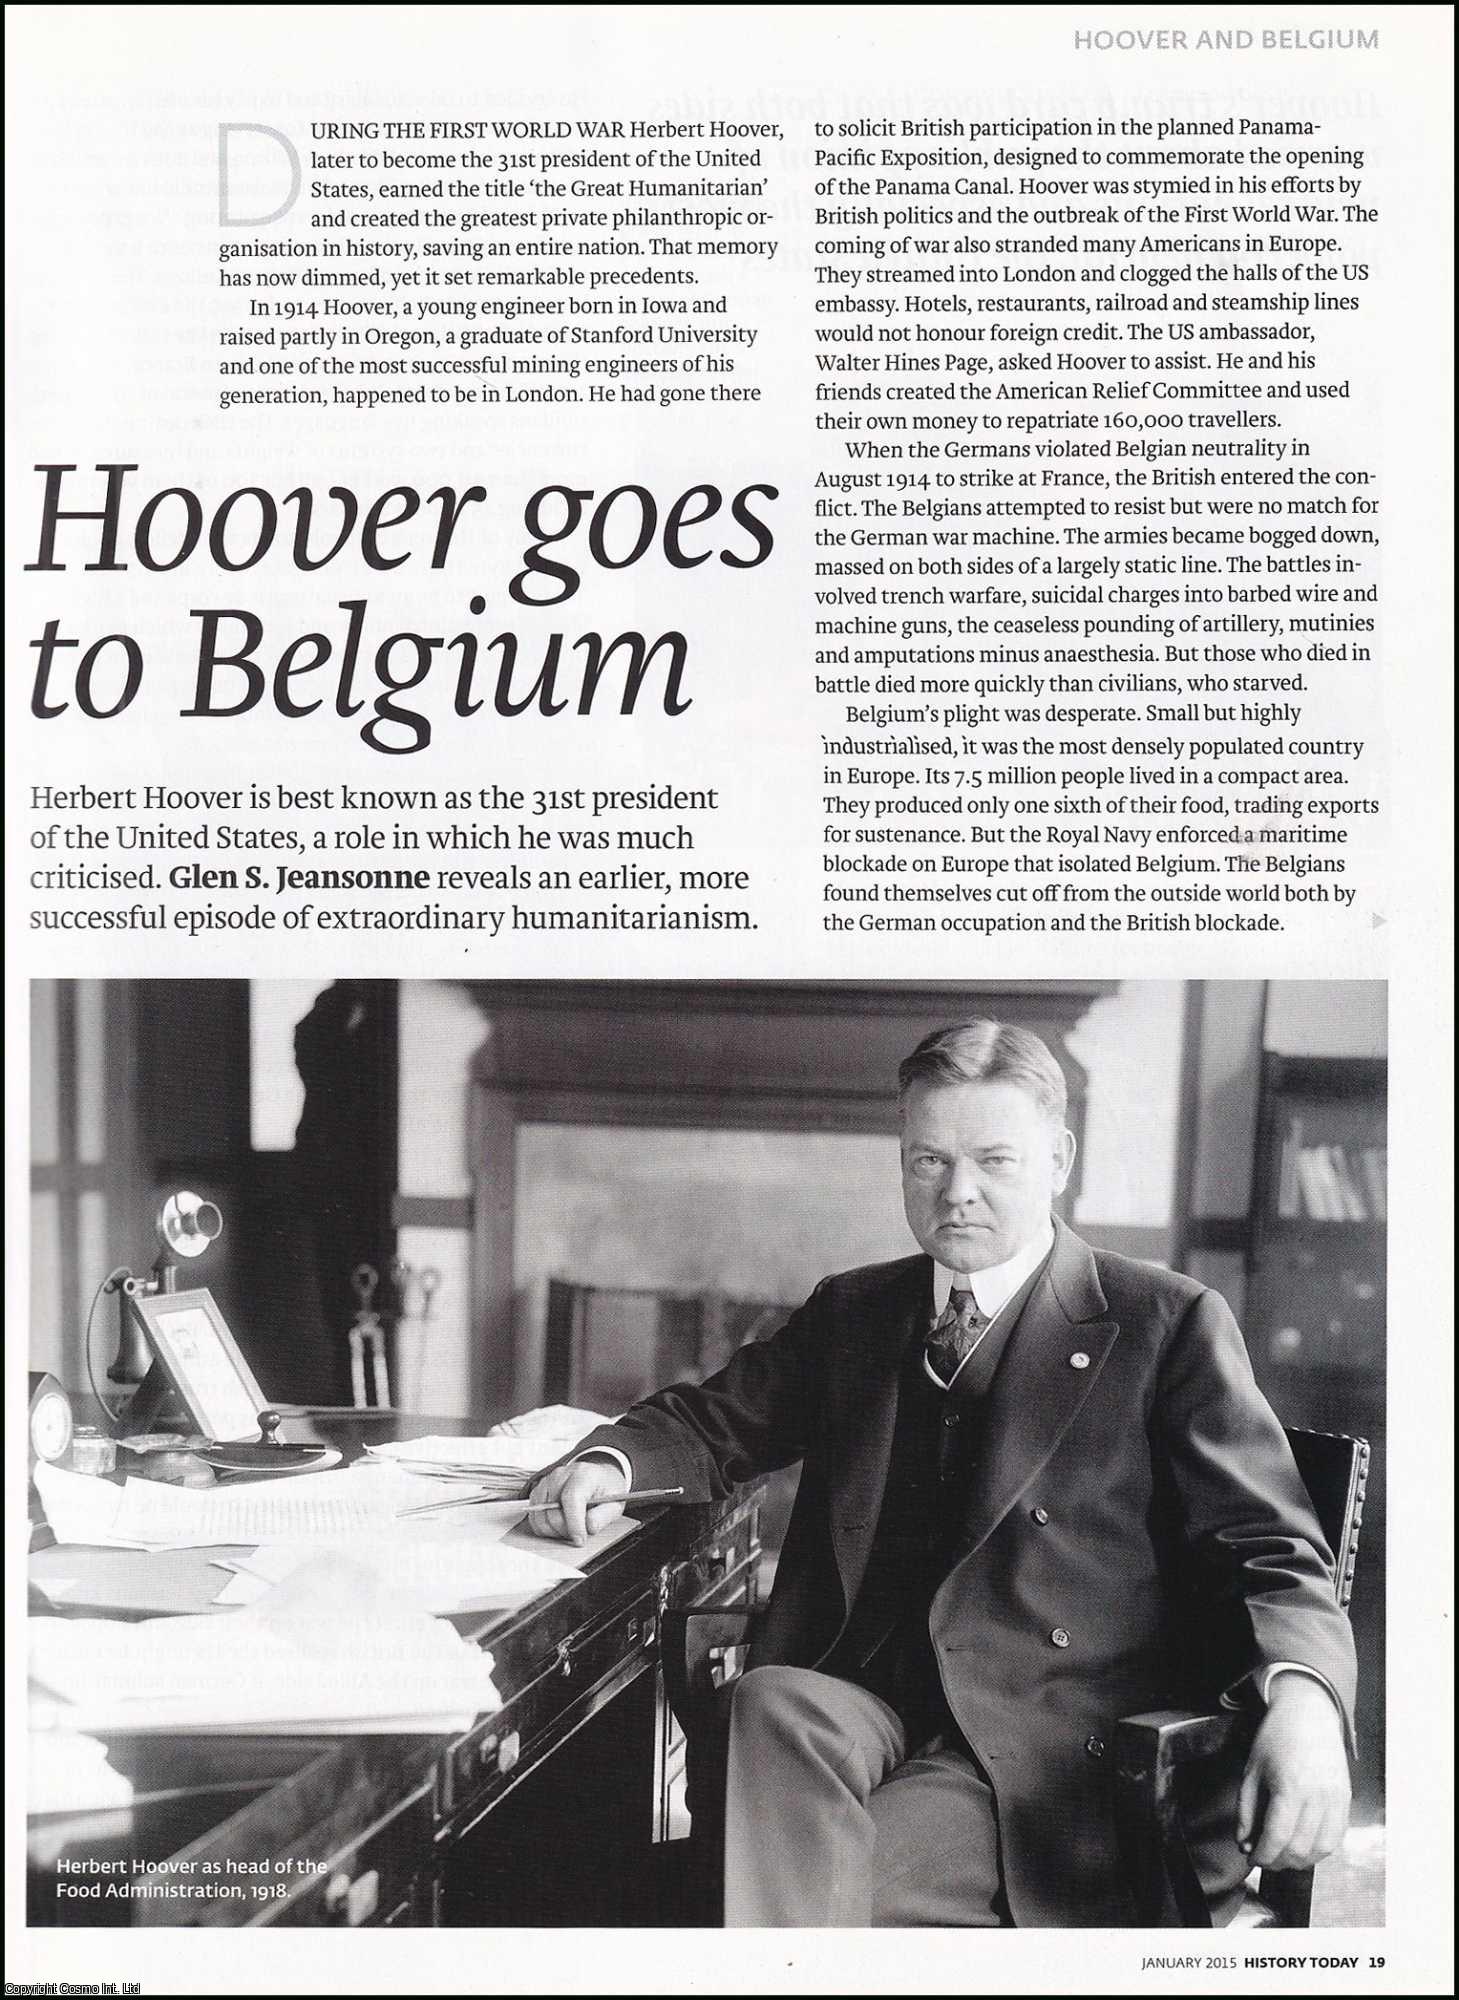 Glen S. Jeansonne - Herbert Hoover Goes to Belgium: Feeding the Country during WWI, an Episode of Extraordinary Humanitarianism. An original article from History Today magazine, 2015.